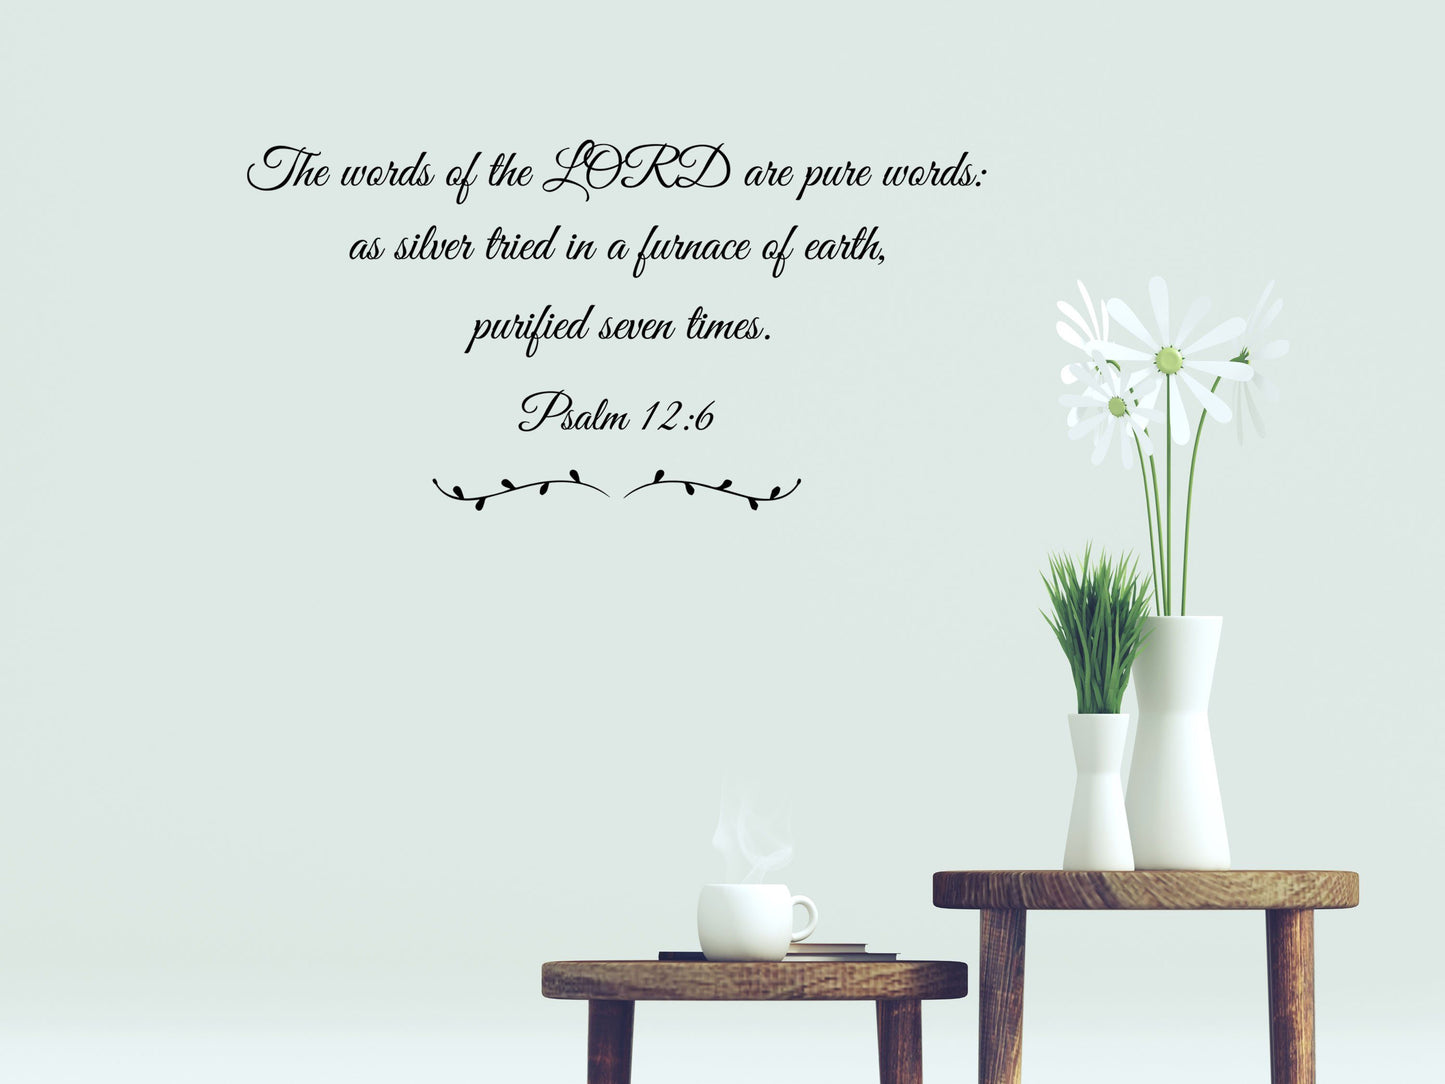 Psalm 12:6 Bible Verse Wall Decal, Bible Wall Art, Decals for Walls, Wall Stickers, Psalm Wall Decal Vinyl Wall Decal Done 